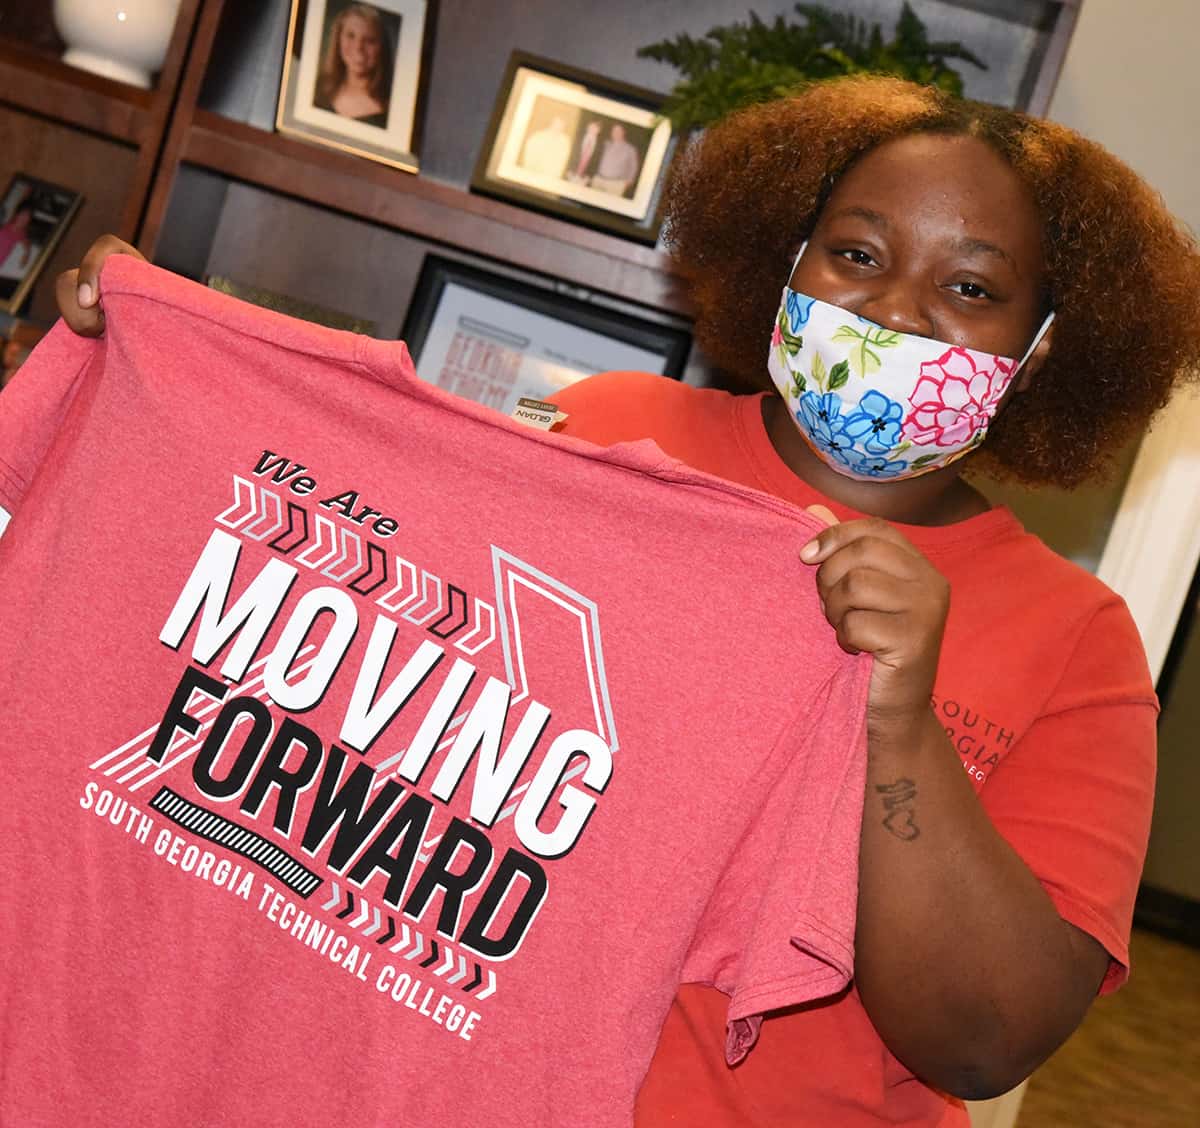 This student is “Moving Forward” Fall semester at South Georgia Technical College. She is proud to show off the new “Moving Forward” t-shirts that is available for students who register for Fall Semester classes while supplies last.